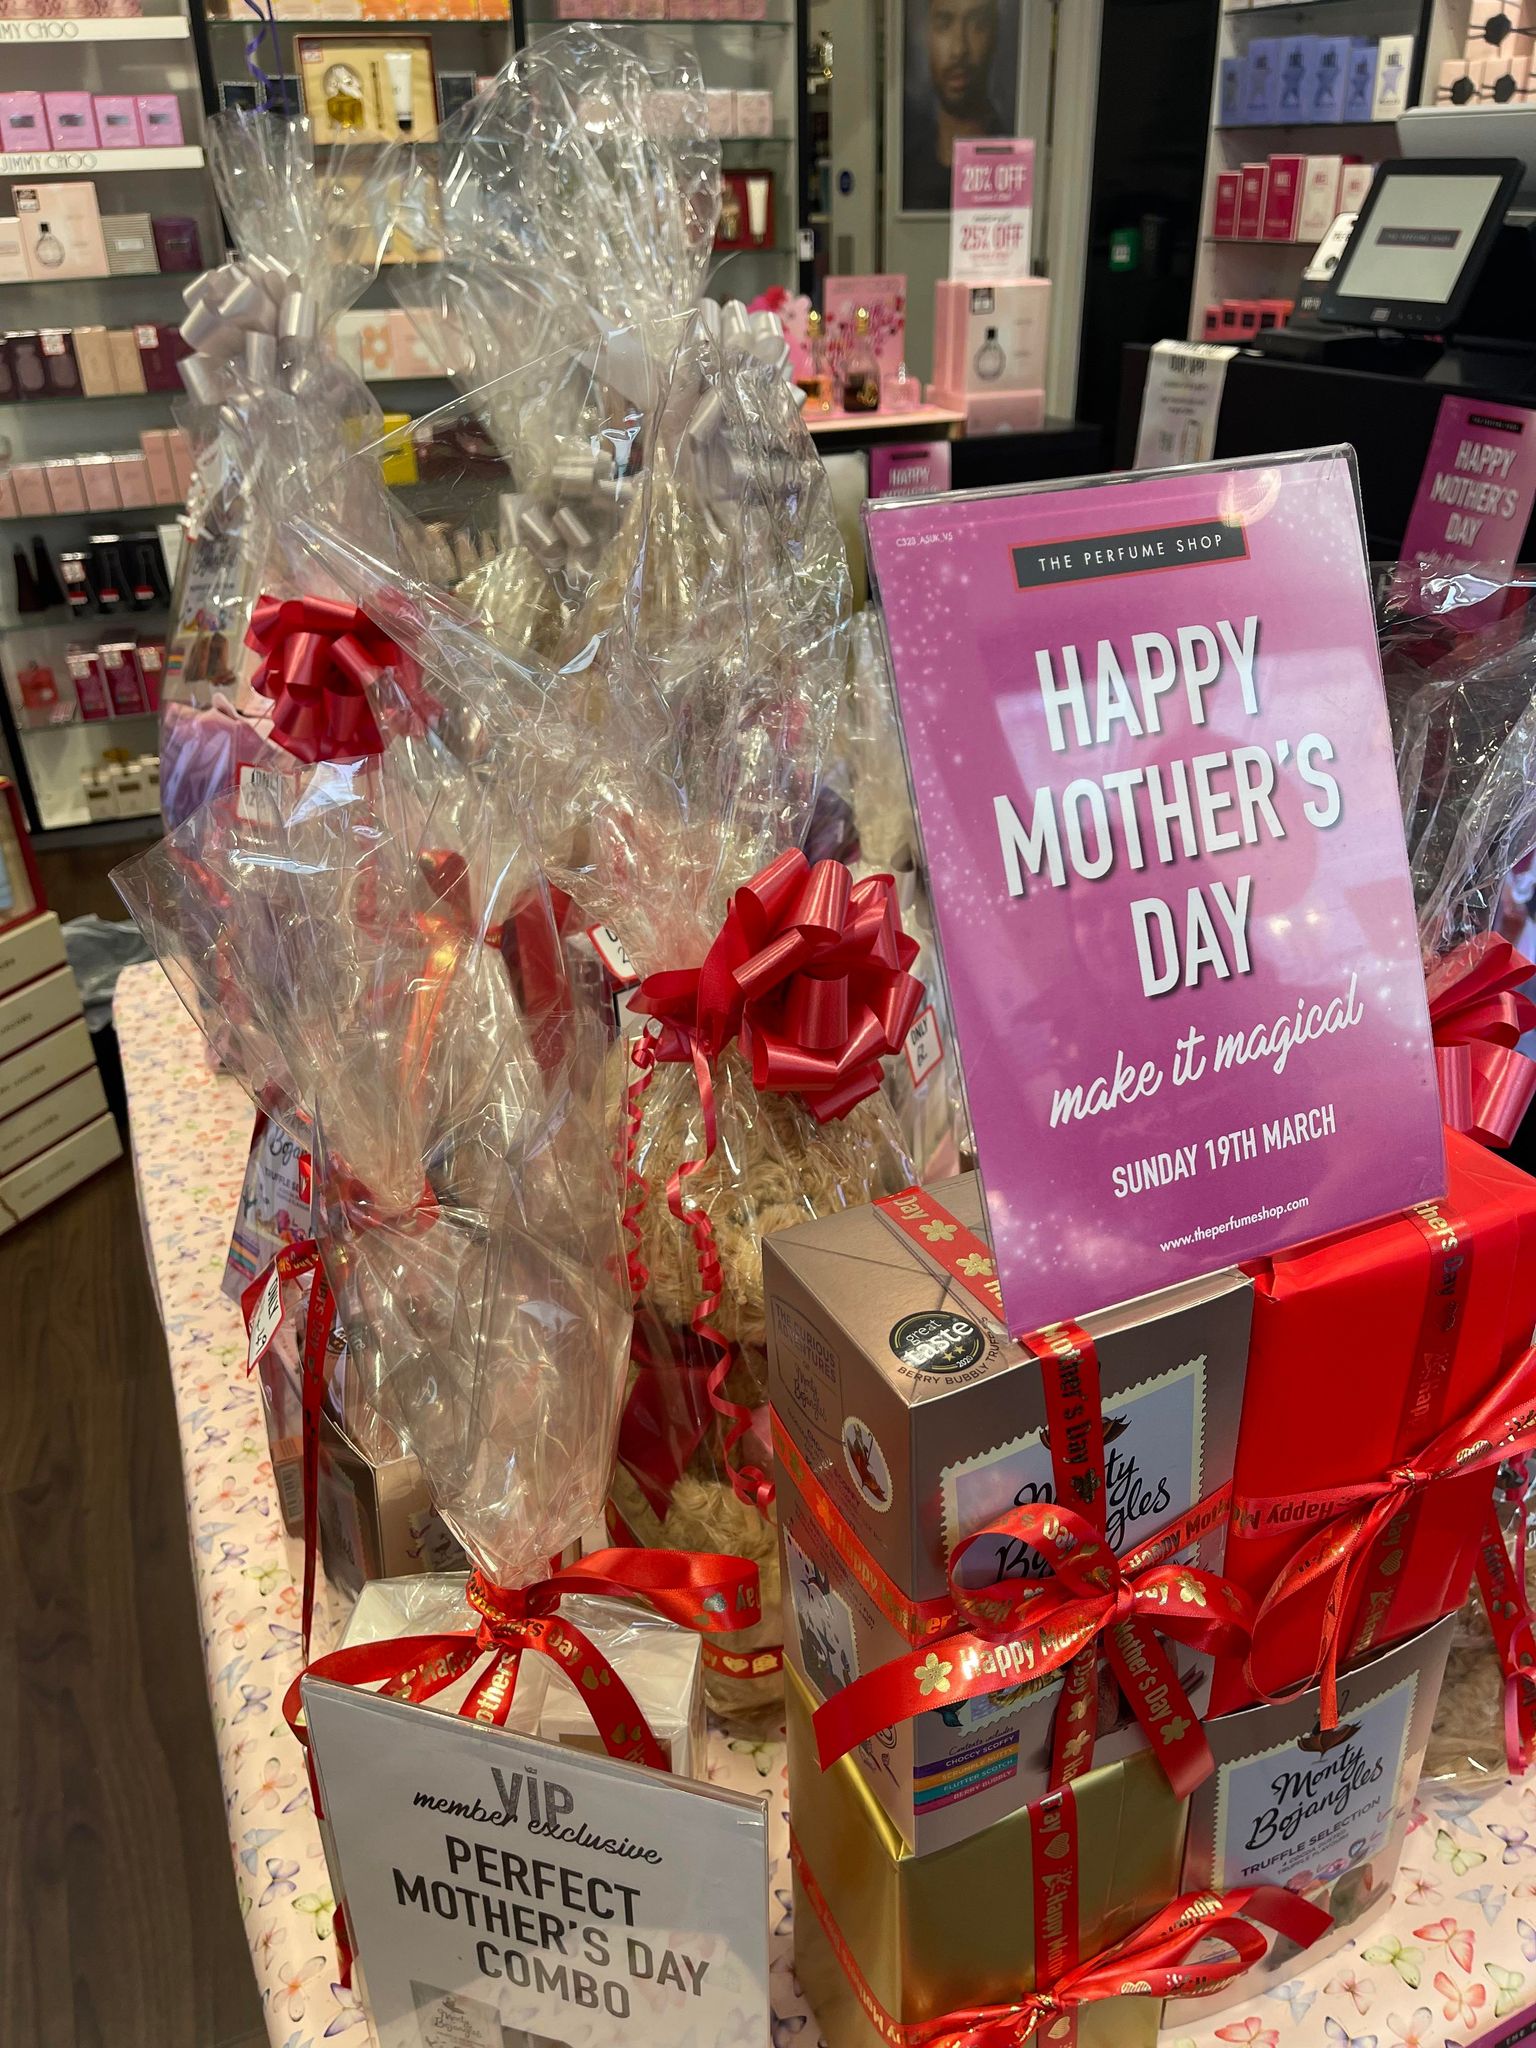 The Perfume Shop Mothers Day Offers